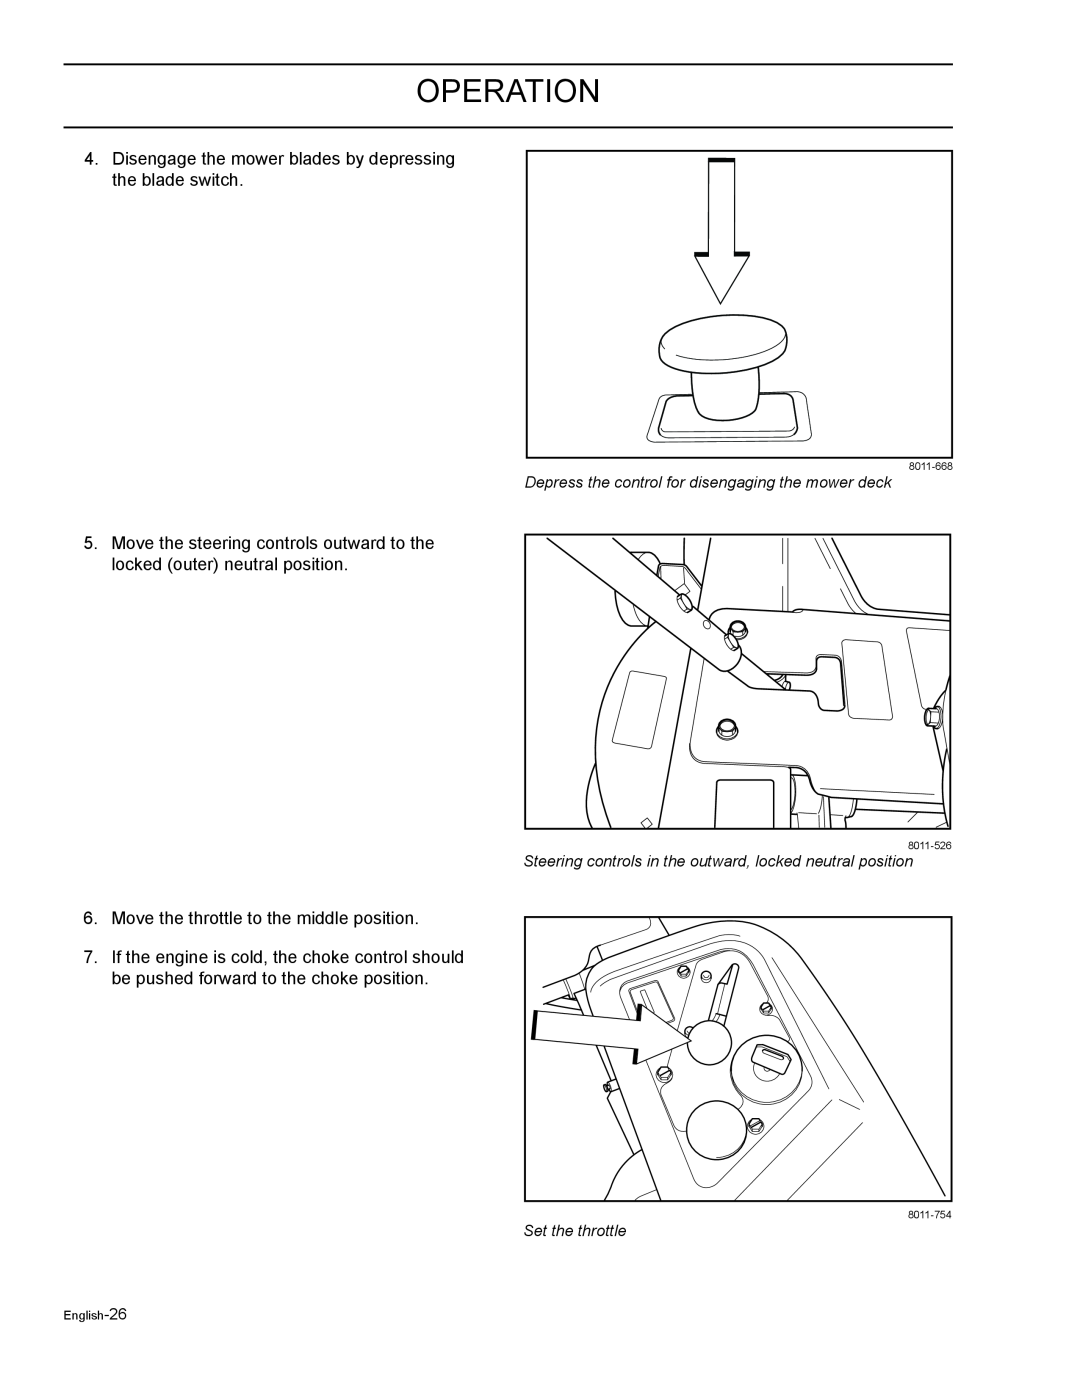 HTC Z5426BF, Z4220BF, Z4824BF, Z4619BF, Z4219BF manual Operation, Move the throttle to the middle position 